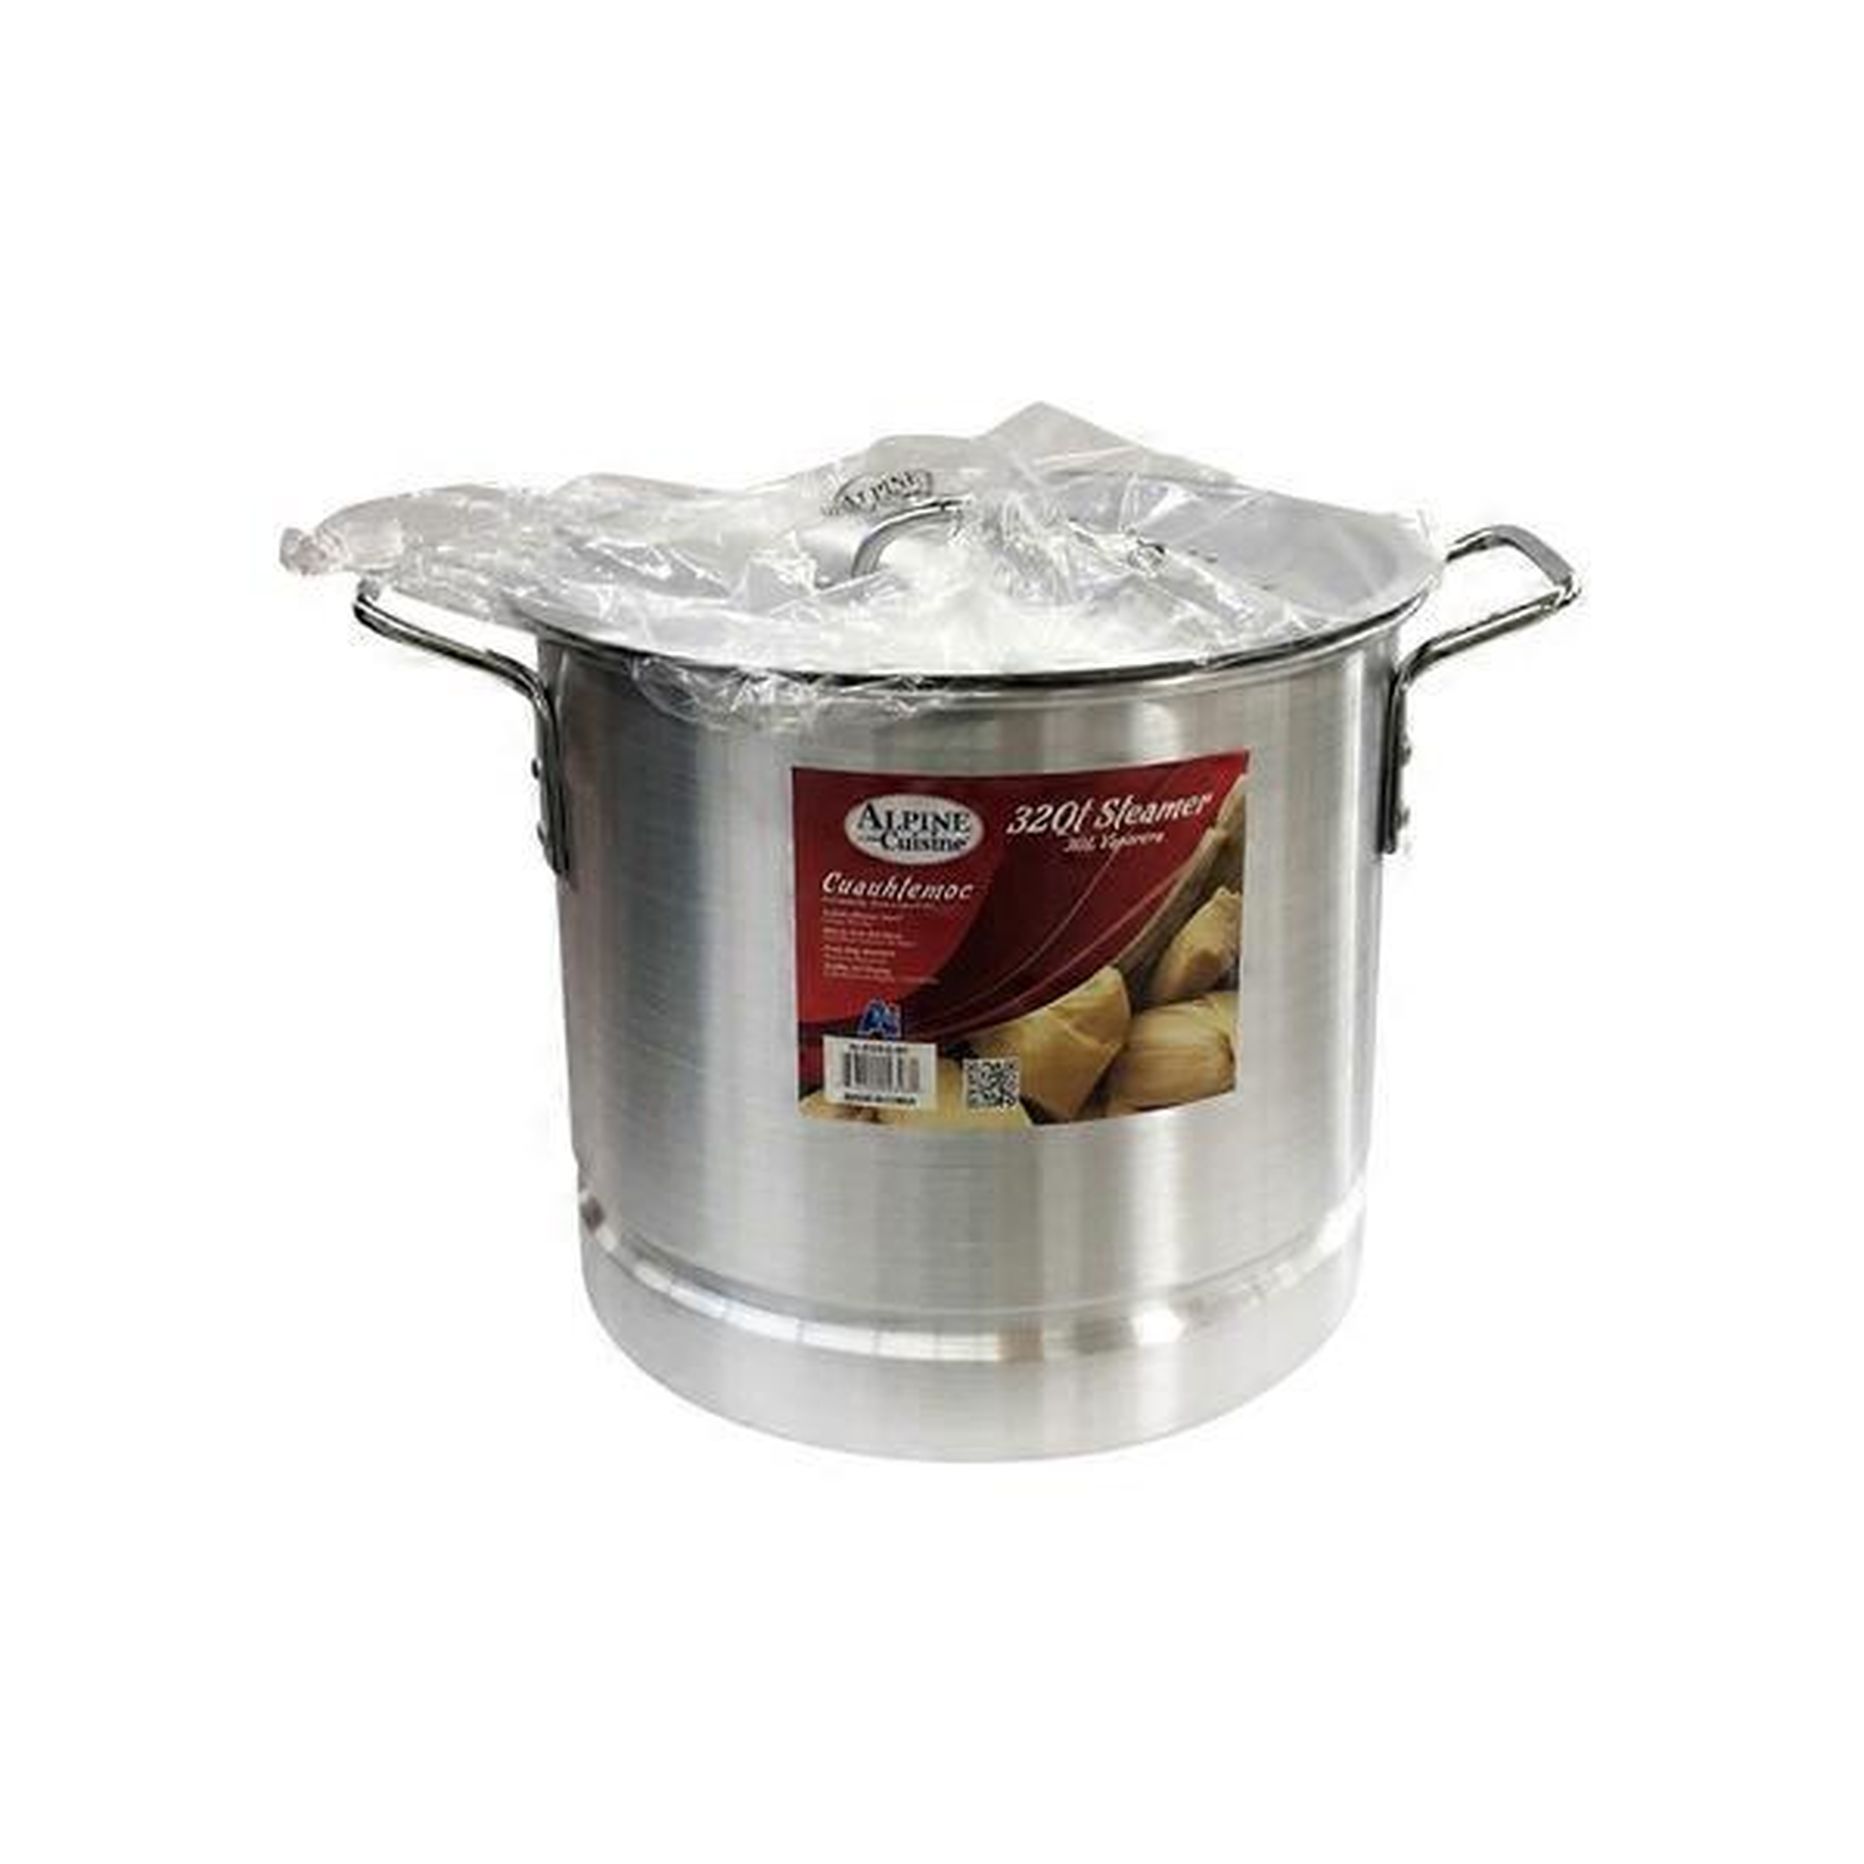 Alpine Cuisine Steamer Stock Pot with Lid - 32-Quart (each) Delivery or Pickup Near Me - Instacart